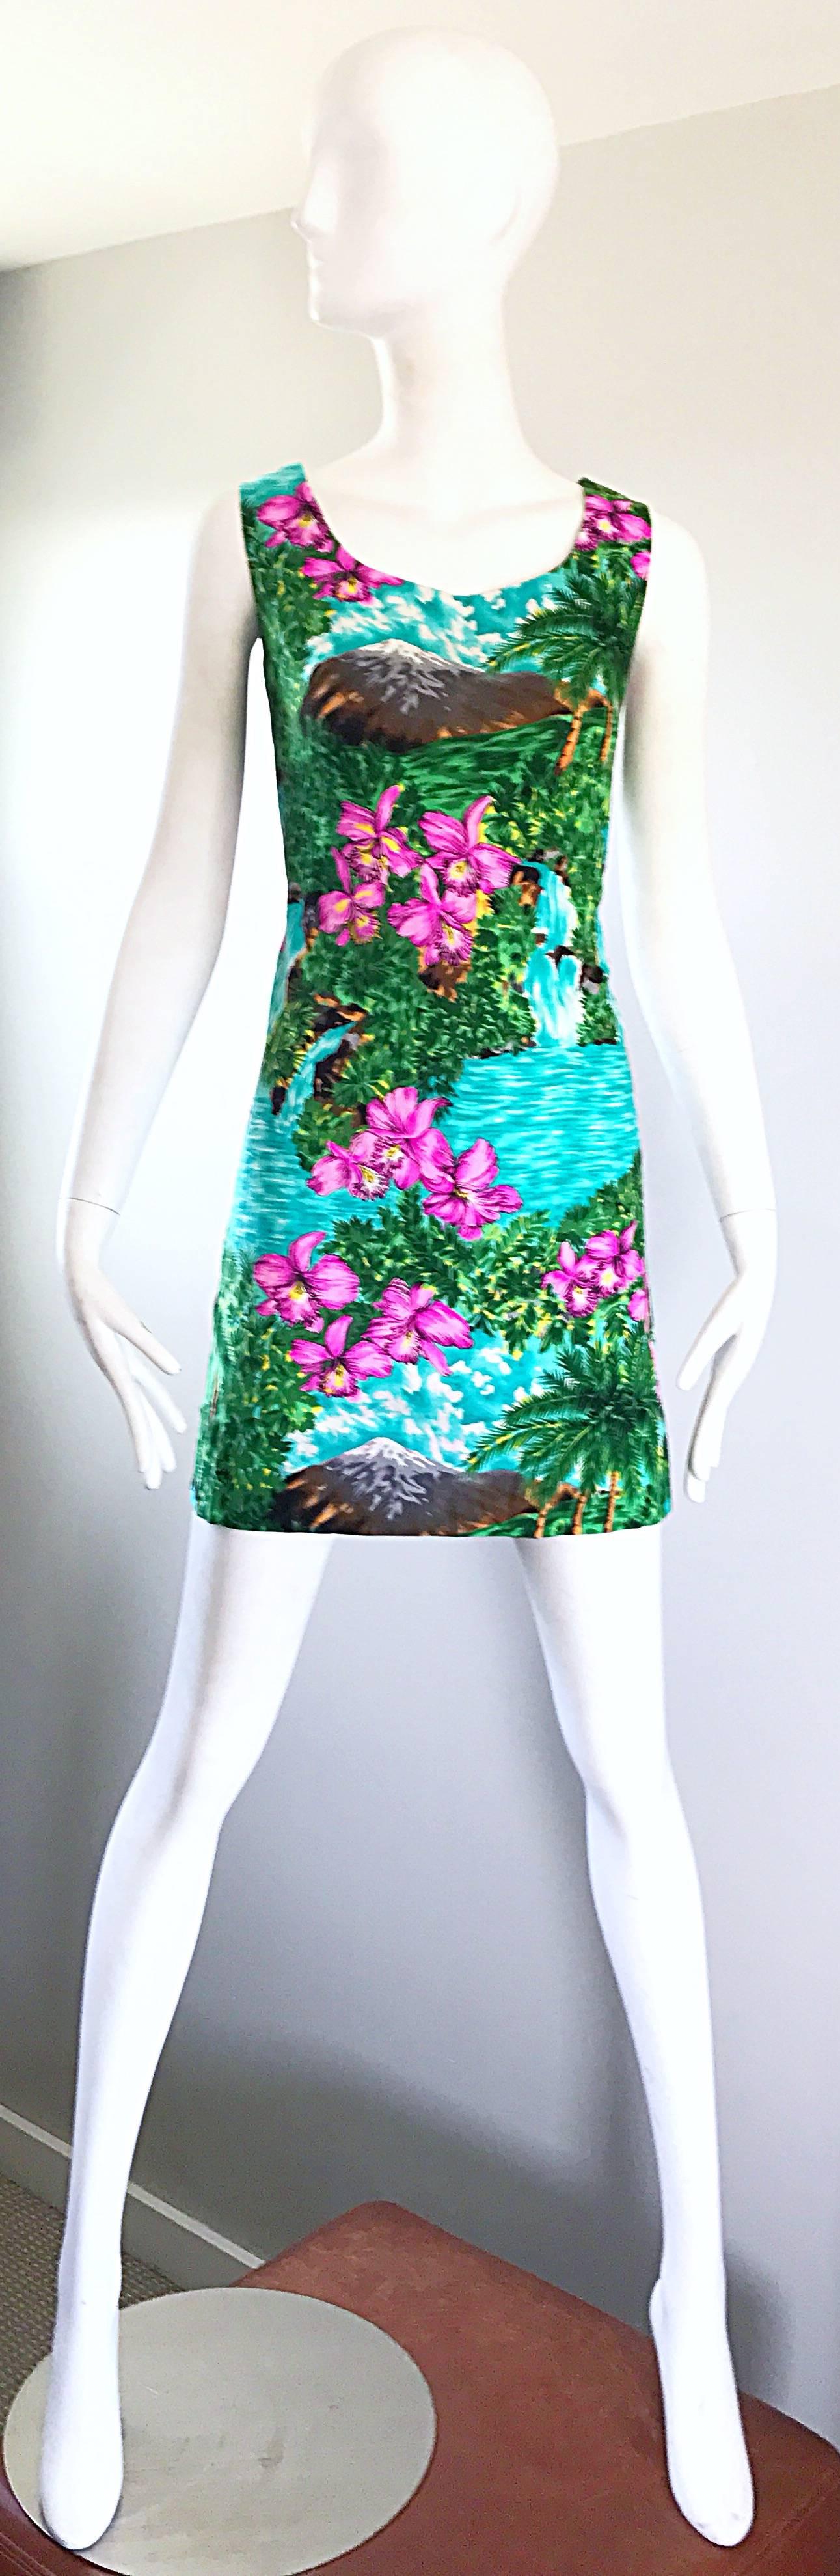 Superb and rare vintage 60s novelty print tropical Hawaiian mini cotton shift dress! Features a tropical 3-D print with palm tress, flowers, clouds, waterfalls, mountains, and DANCING HULA GIRLS throughout! Full metal zipper up the back with